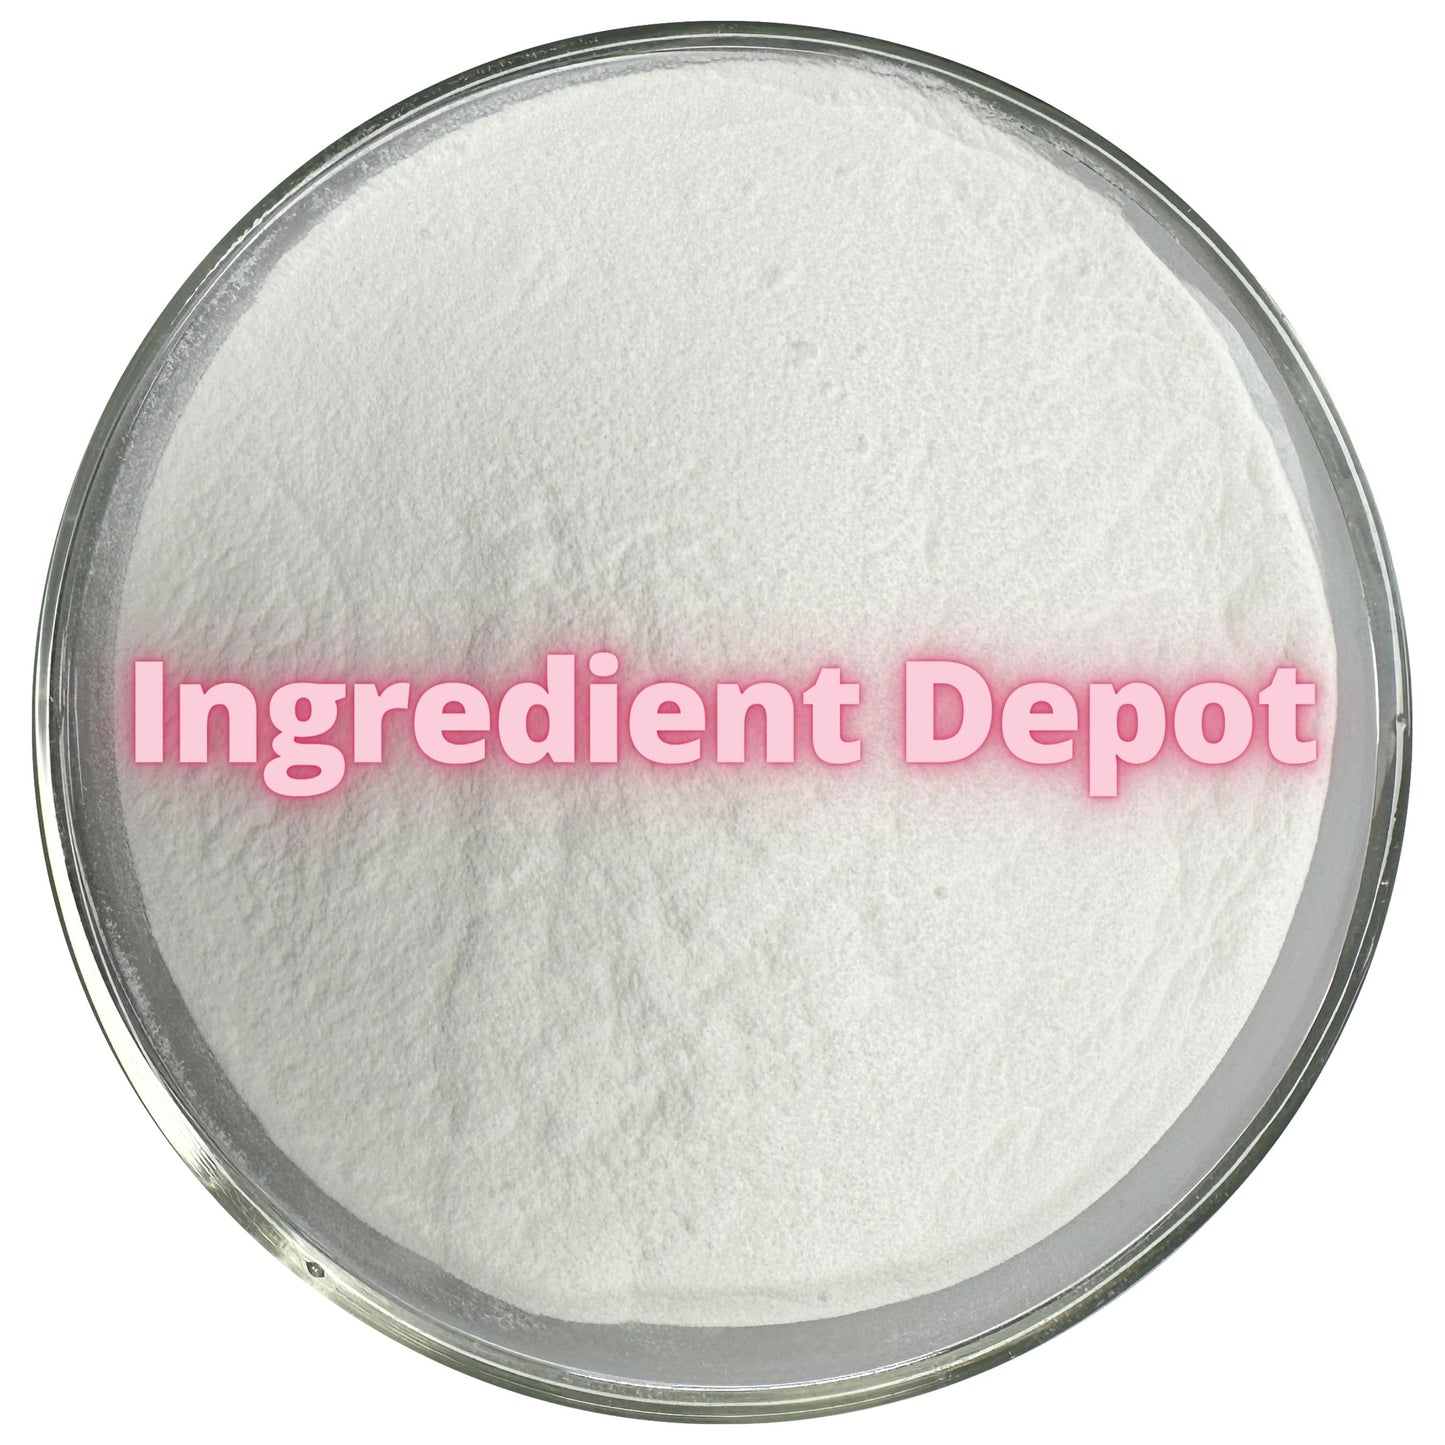 SMCC 50 Silicified Microcrystalline Cellulose - USP/NF Grade 25 kgs - Ingredient Depot